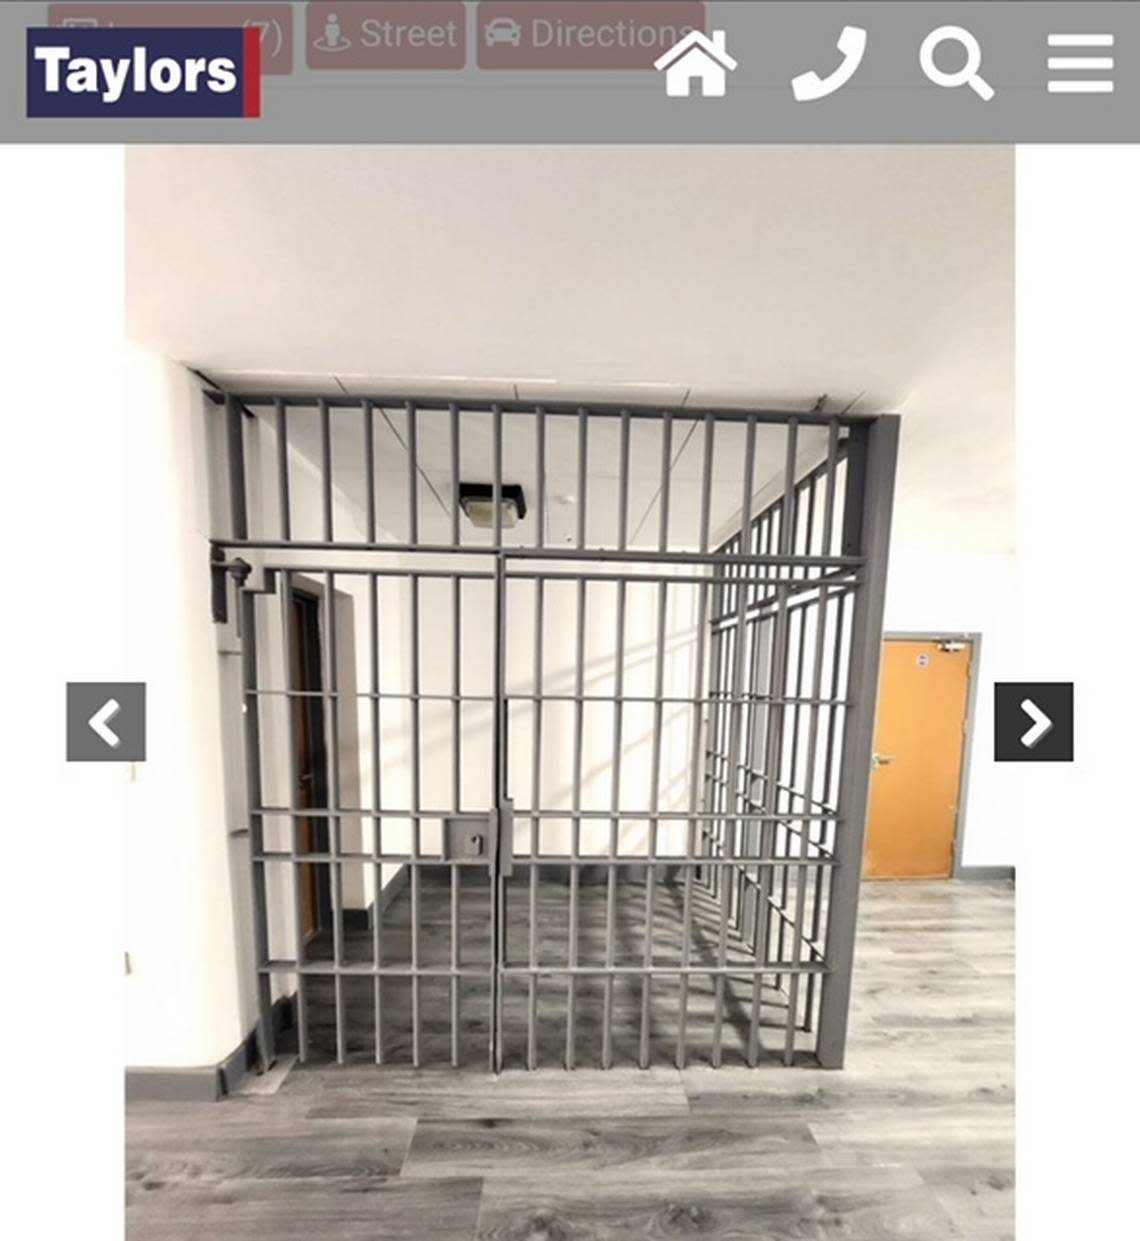 Holding cell Screen grab from Taylors Estate Agents